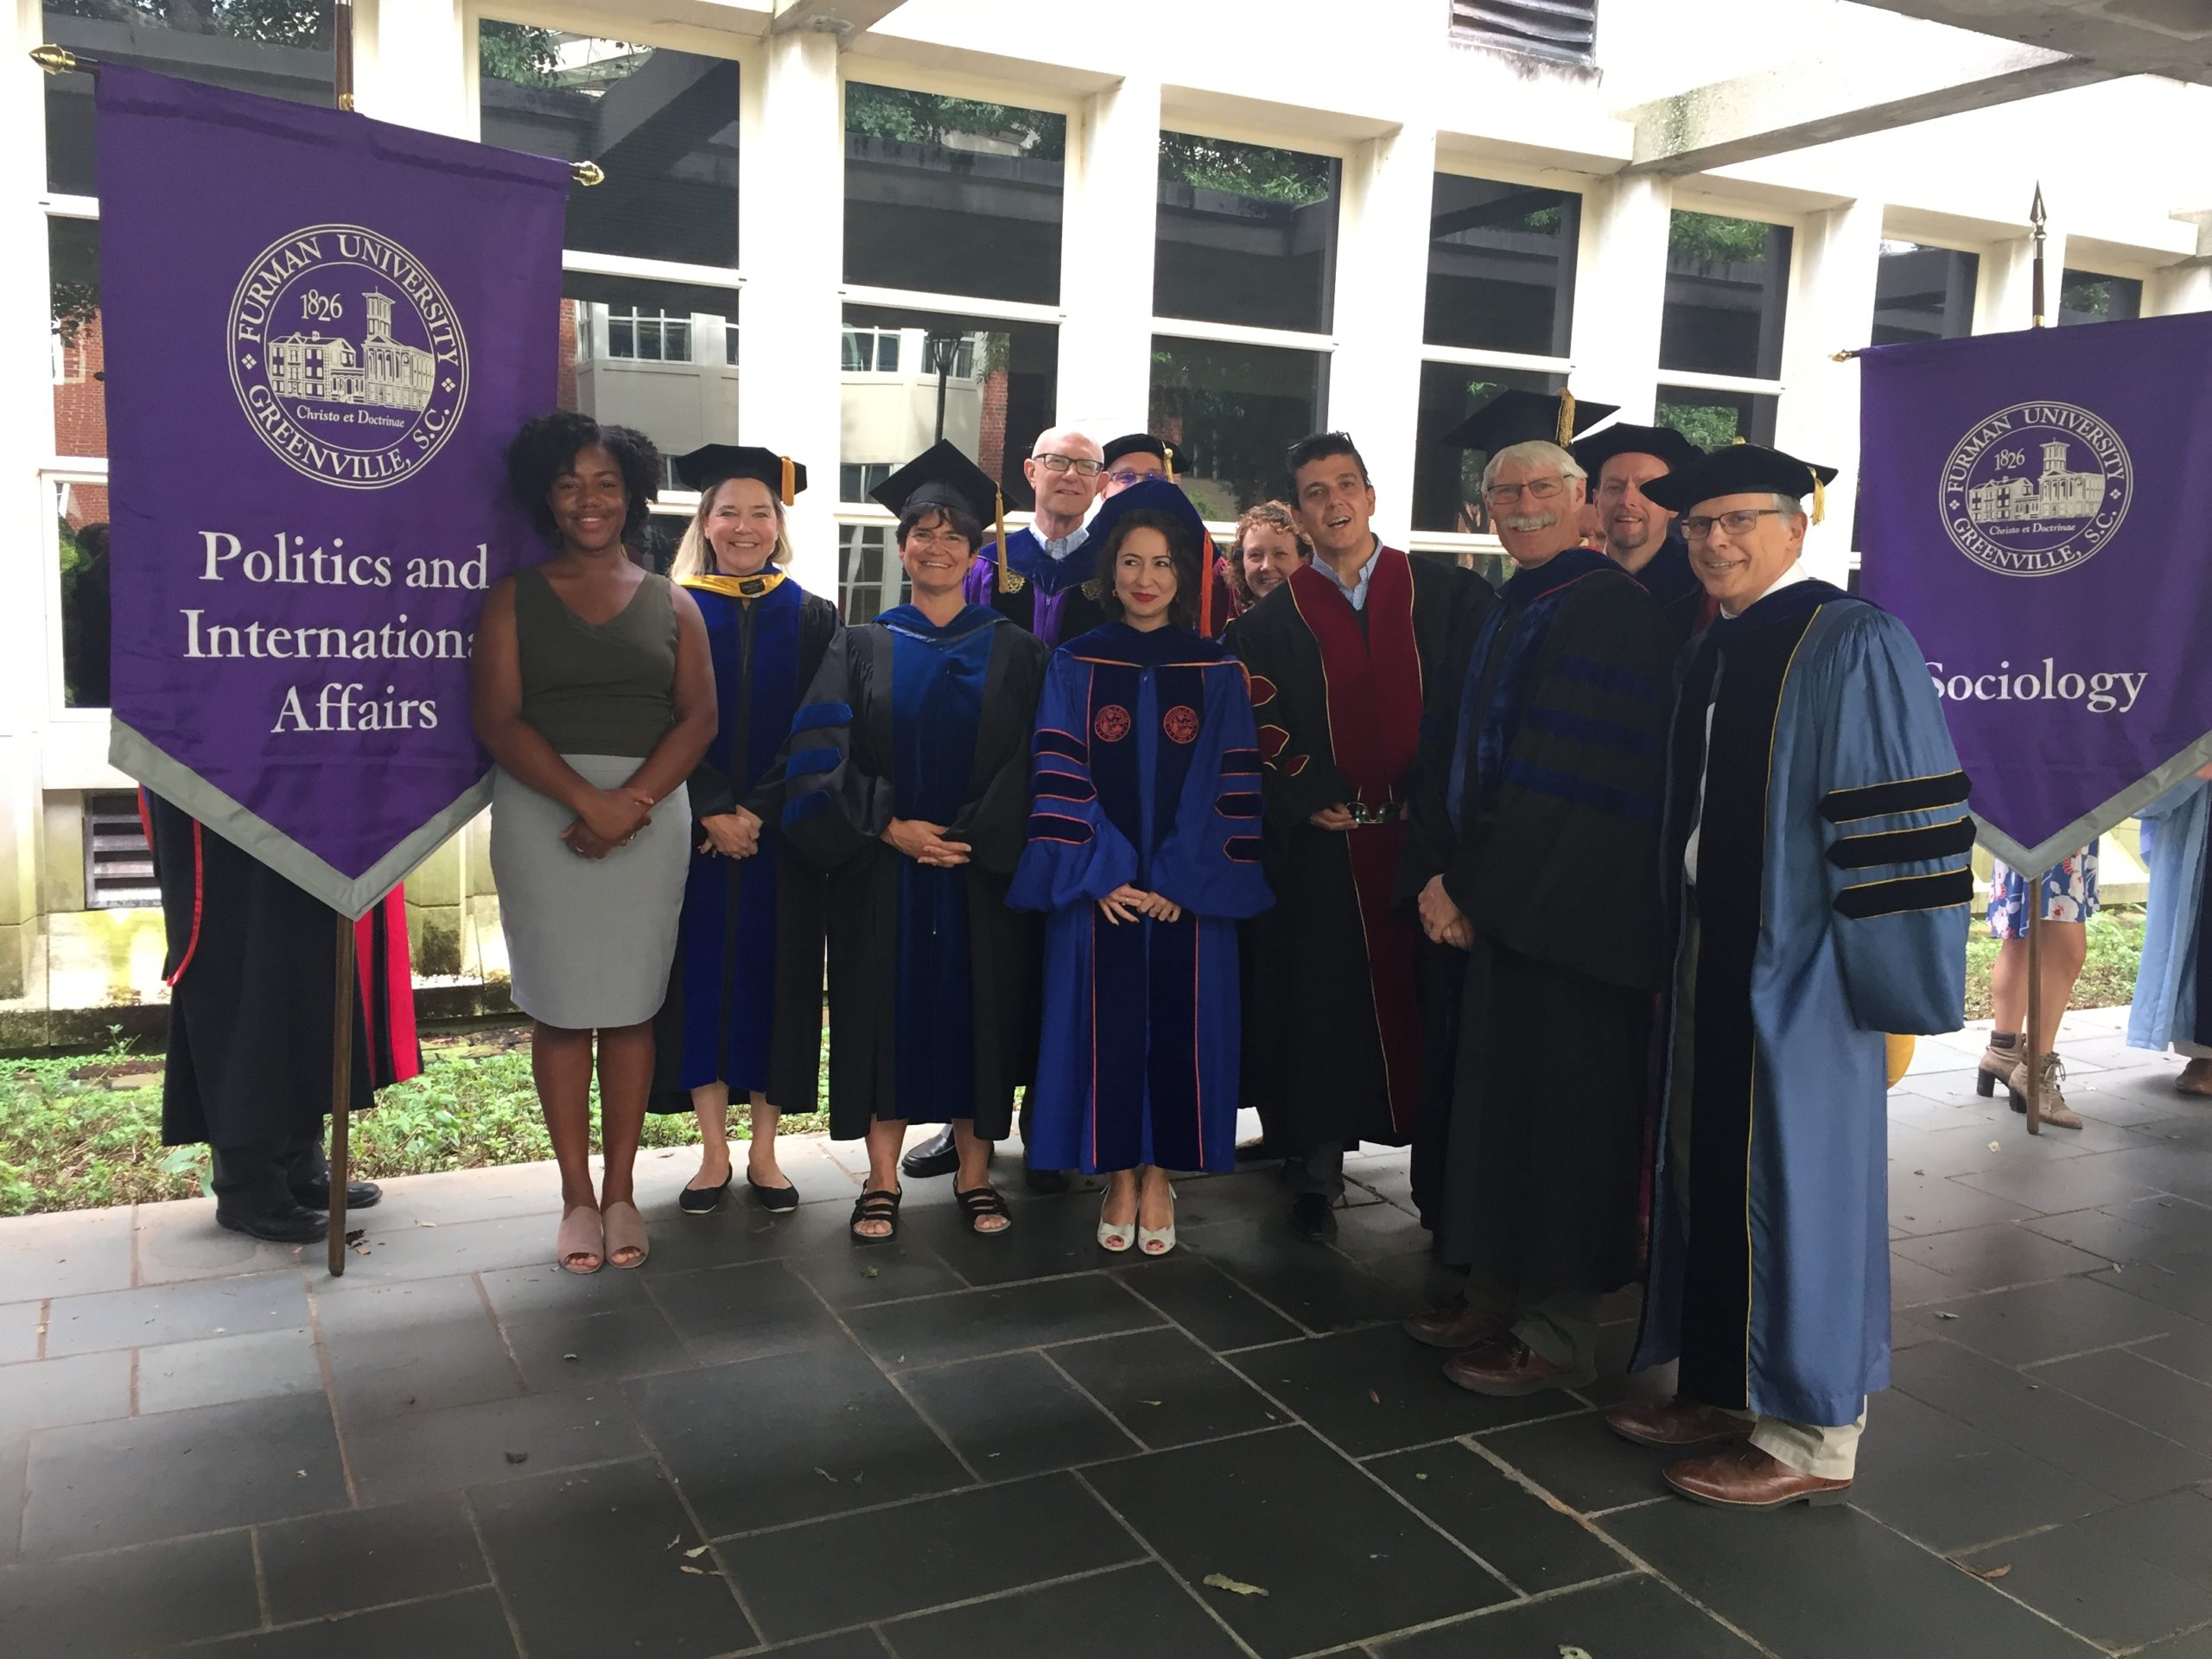 Faculty members in group with commencement garb